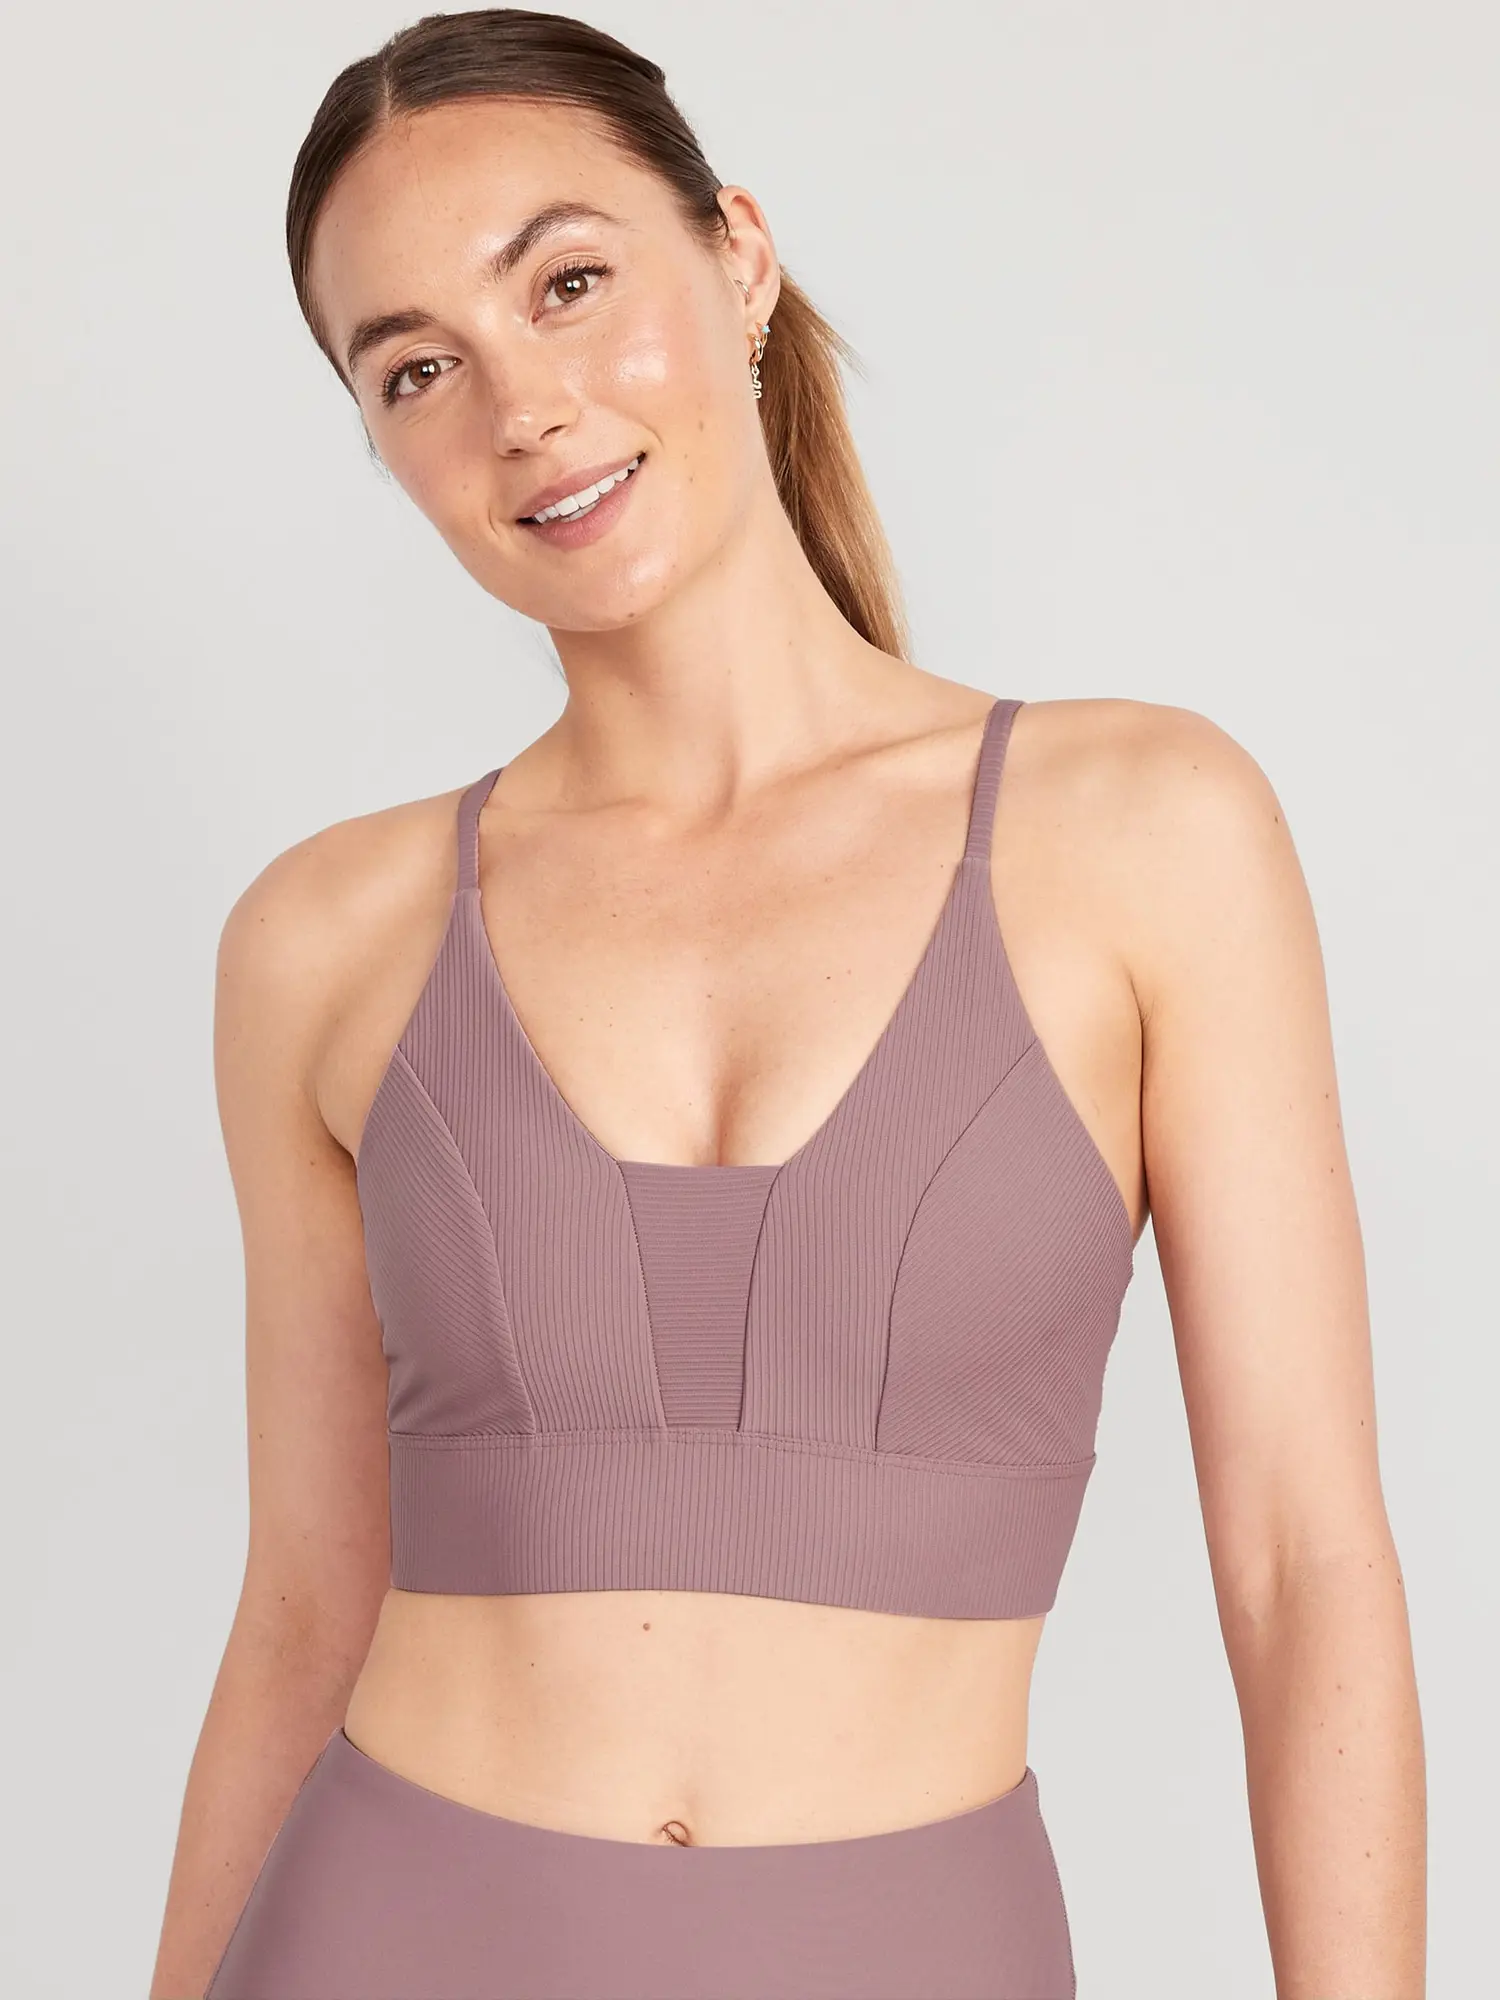 Old Navy Light Support PowerSoft Textured-Rib Sports Bra for Women pink. 1